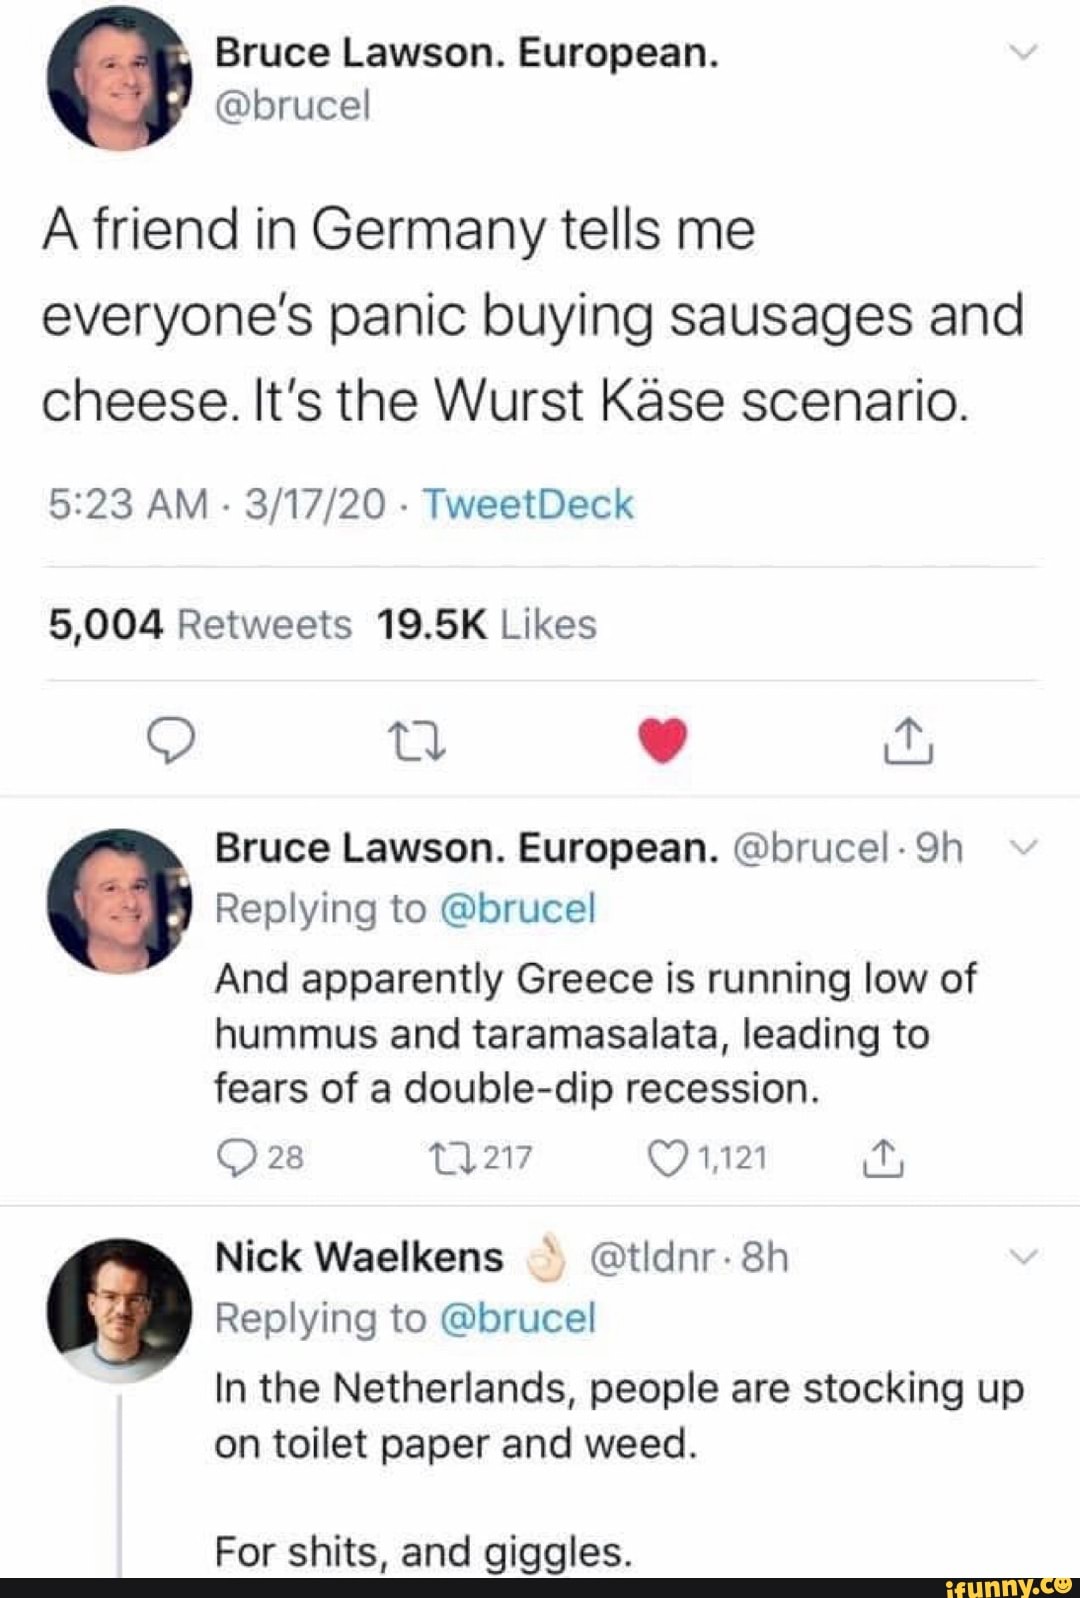 A friend in Germany tells me everyone's panic buying sausages and cheese. It's the Wurst Kase scenario. 5:23 AM 3/17/20 5,004 Retweets 19.5K Likes Bruce Lawson. European. @bruce!- 9h Replying to @brucel And apparently Greece is running low of hummus and taramasalata, leading to fears of a double-dip recession. © 28 11217 (91,121 ity Replying to @brucel In the Netherlands, people are stocking up on toilet paper and weed. For shits, and giggles.